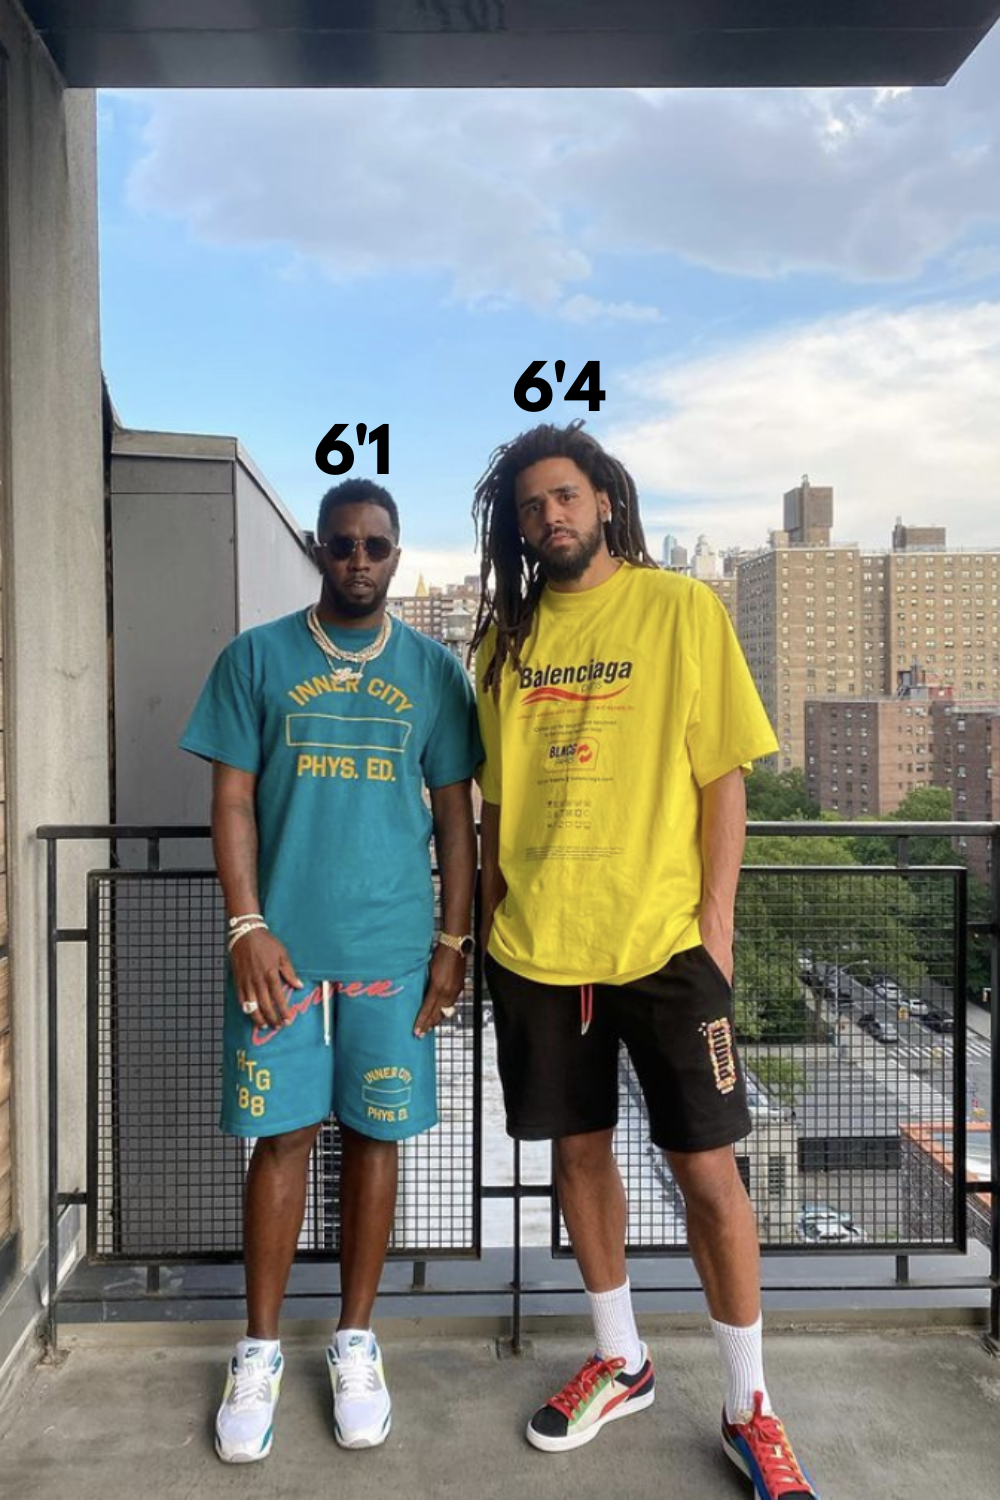 How Tall is Diddy